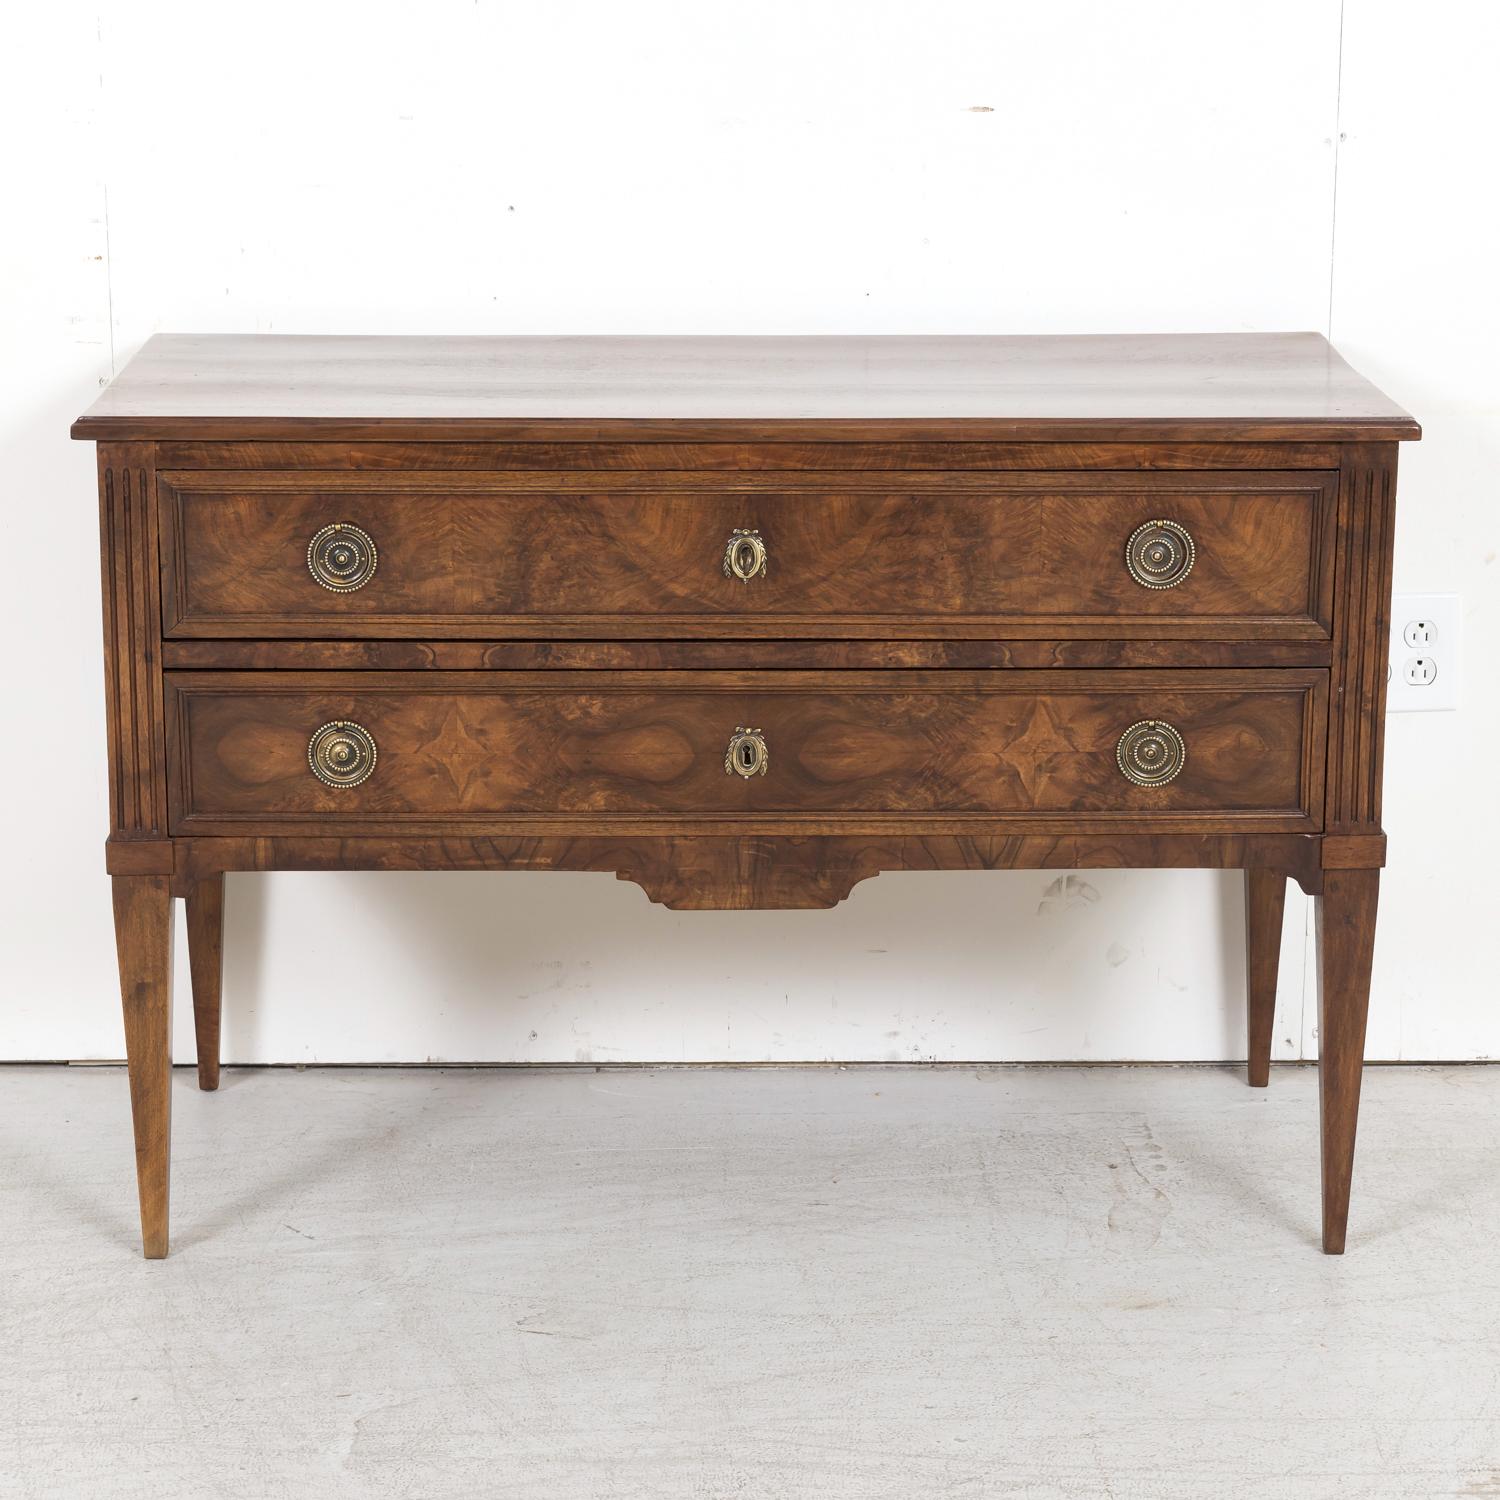 A striking 19th century French Louis XVI style commode sauteuse handcrafted of walnut with burled walnut drawers by talented artisans in the South of France near the hilltop town of Carcassonne, circa 1880s, having a rectangular plank top sitting